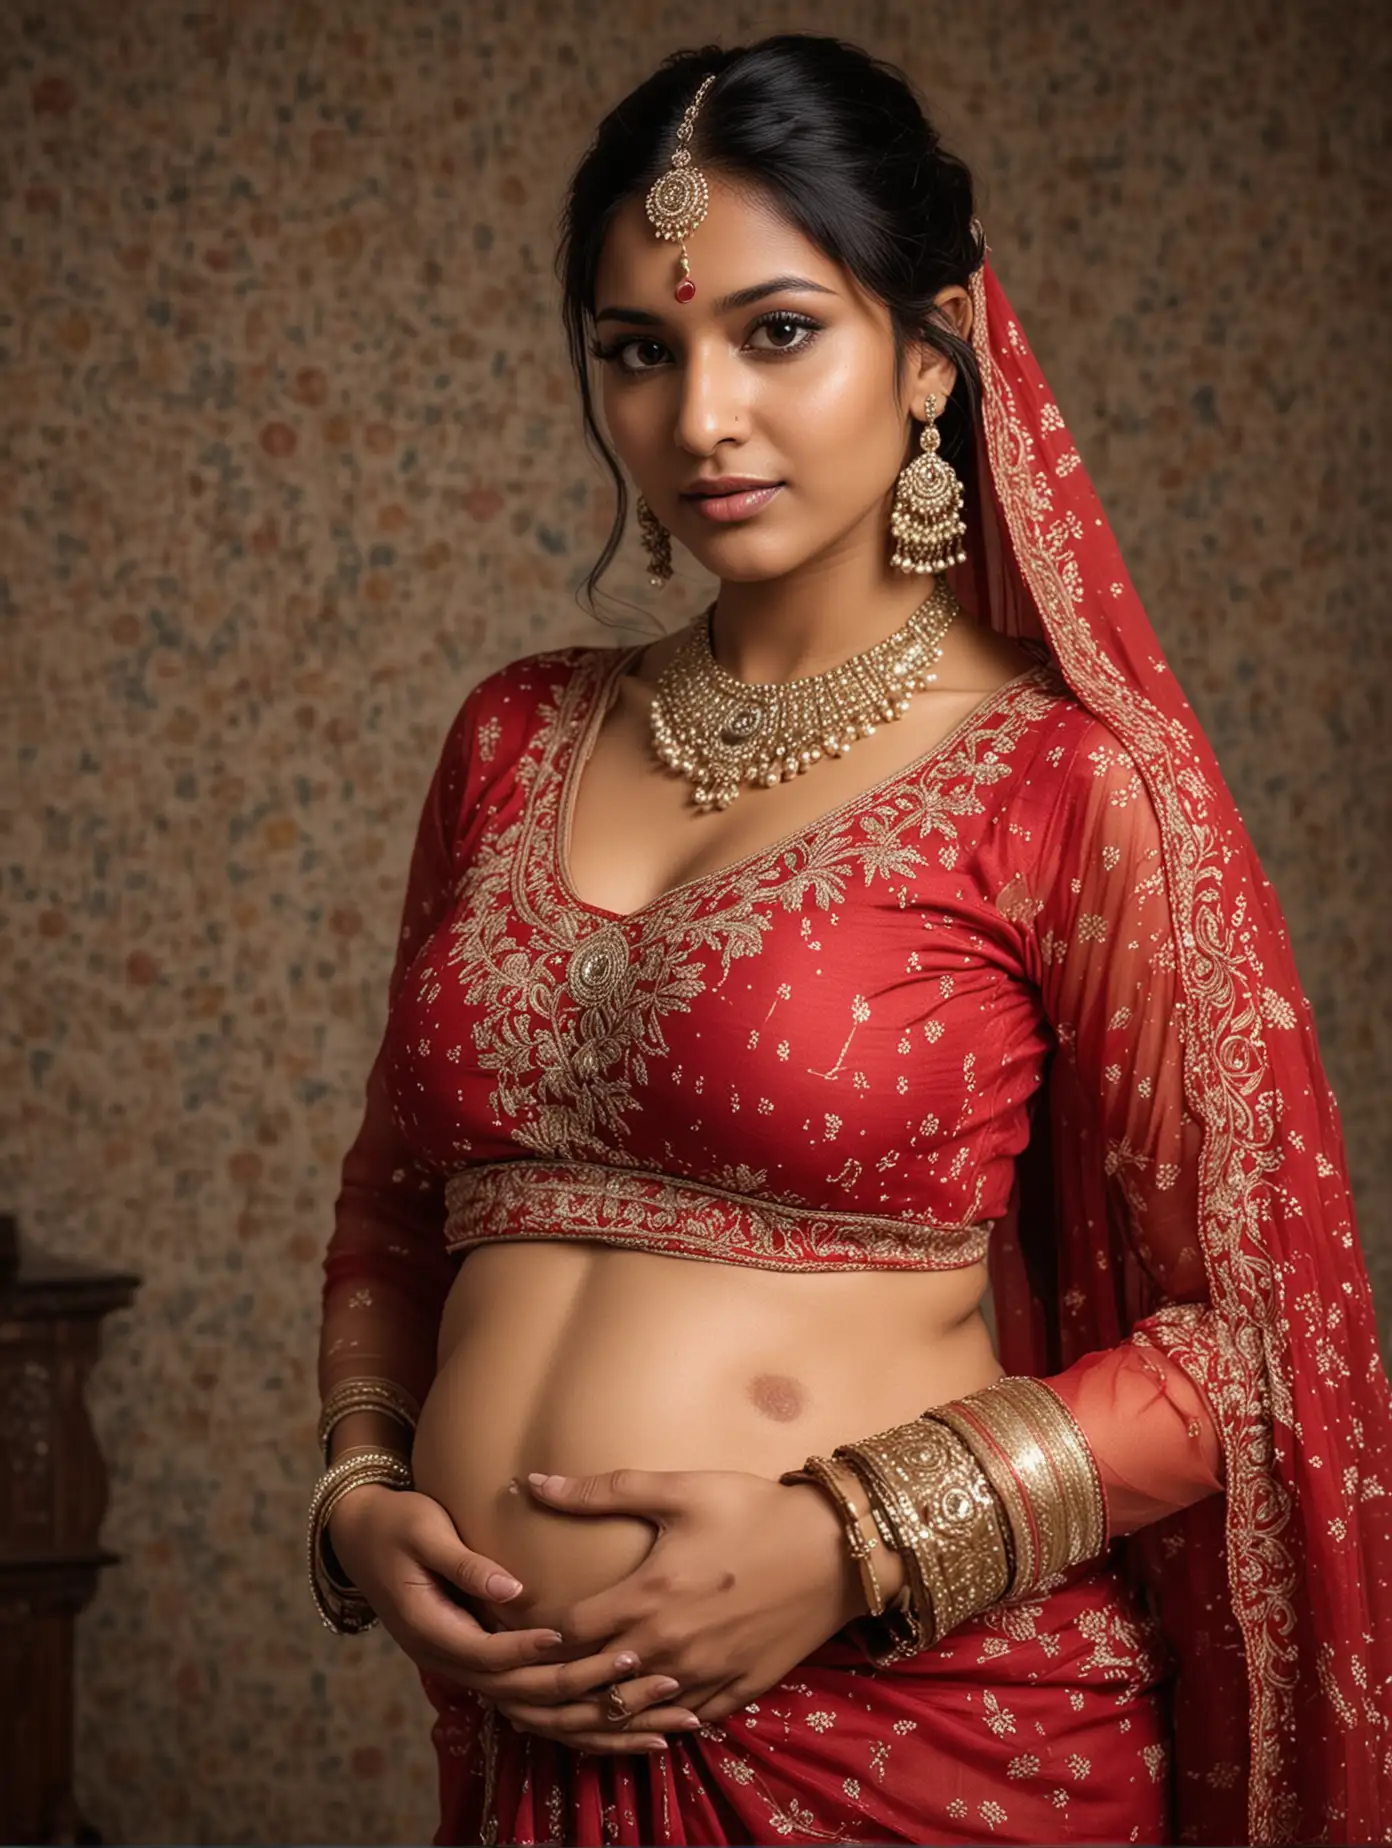 Sexy Indian girl, high sex, pregnant, gorgeous clothes, nobility, facing the camera, exquisite facial features, professional photography technology, indoor scene